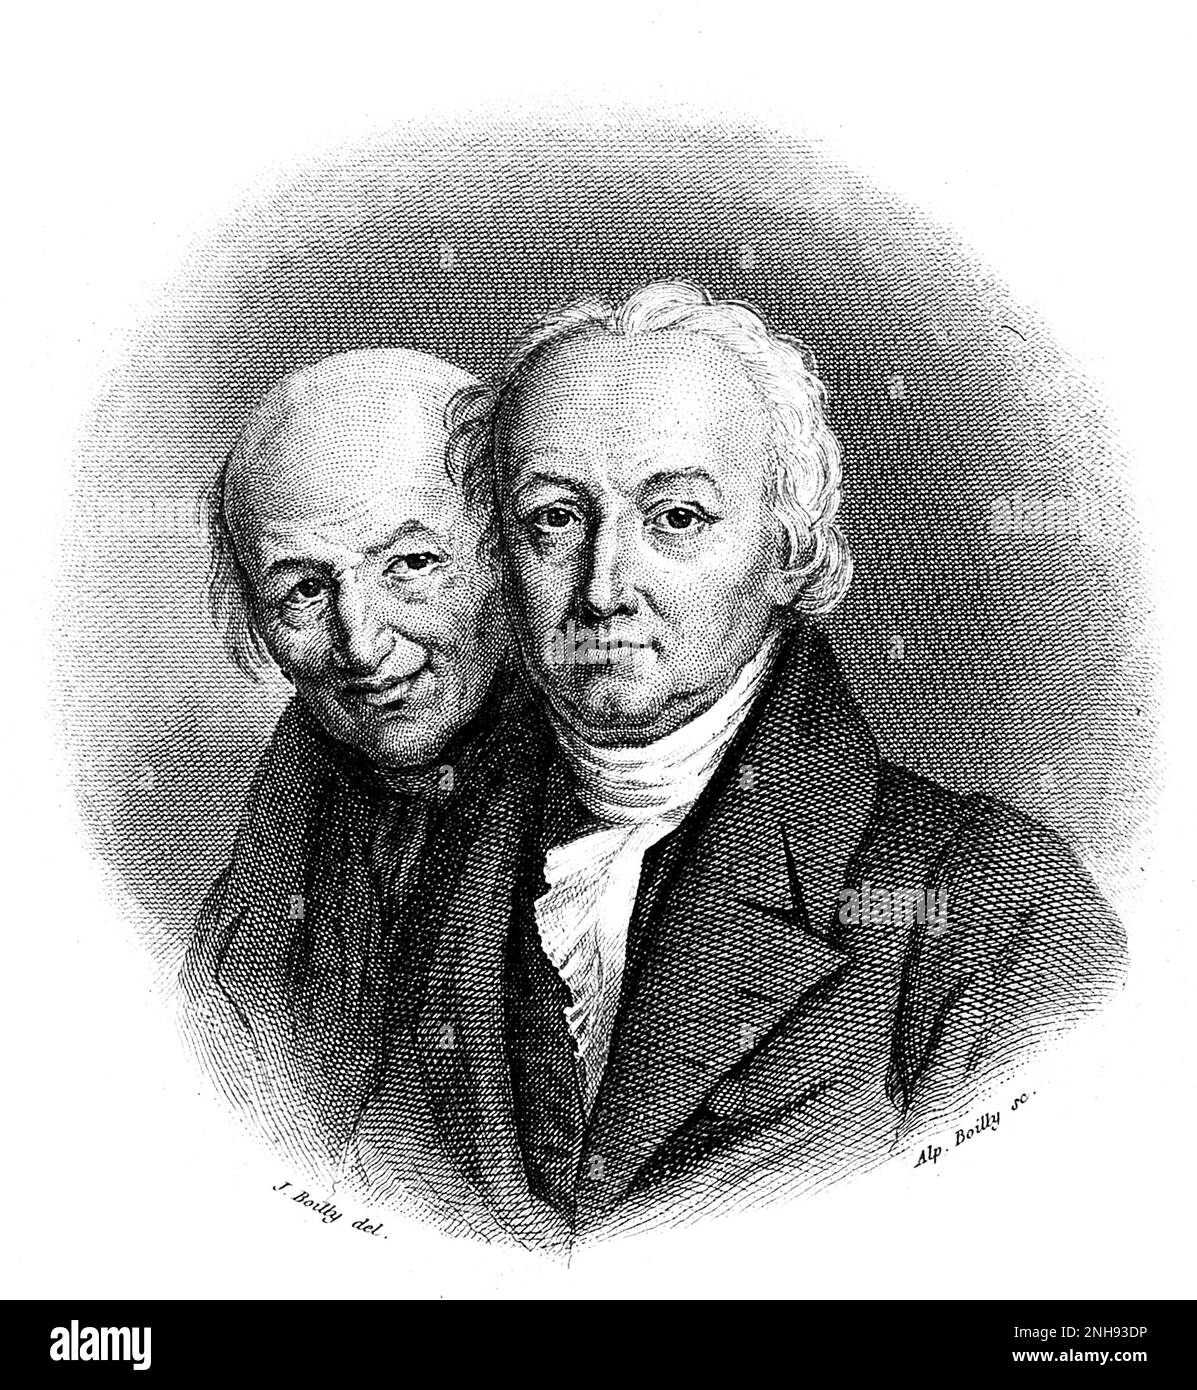 Brothers Rene-Just Hauy (left) and Valentin Hauy. Engraving by A. Boilly after J. Boilly, 19th century. Valentin Hauy (1745-1822) established the first school for the blind in 1785 in Paris. Rene Just Hauy (1743-1822) was a priest and mineralogist, considered the father of modern crystallography. Stock Photo